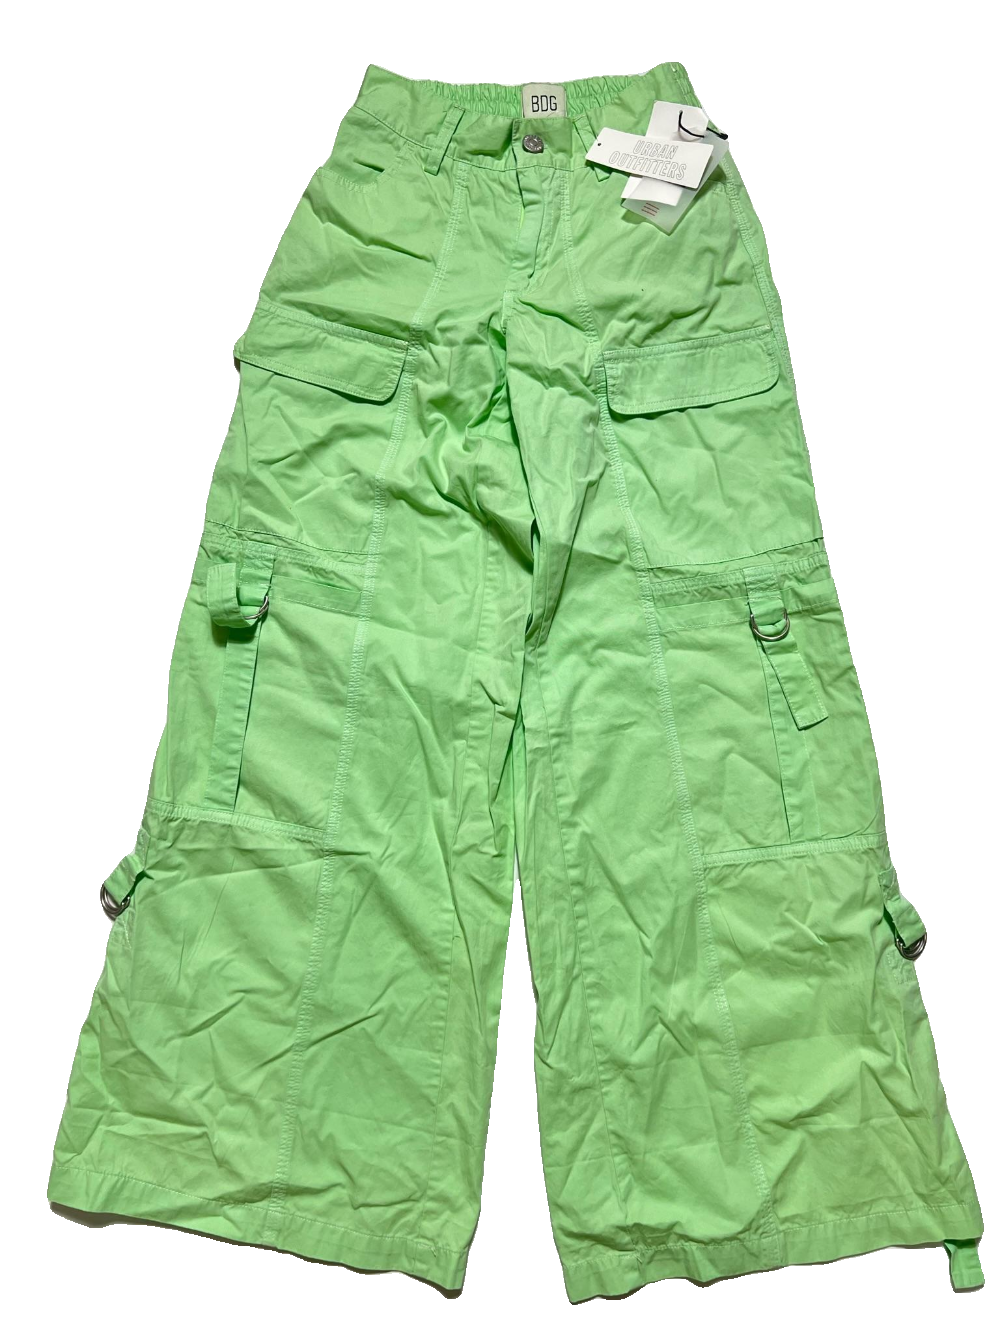 BDG - Neon Green Cargo New with Tags!